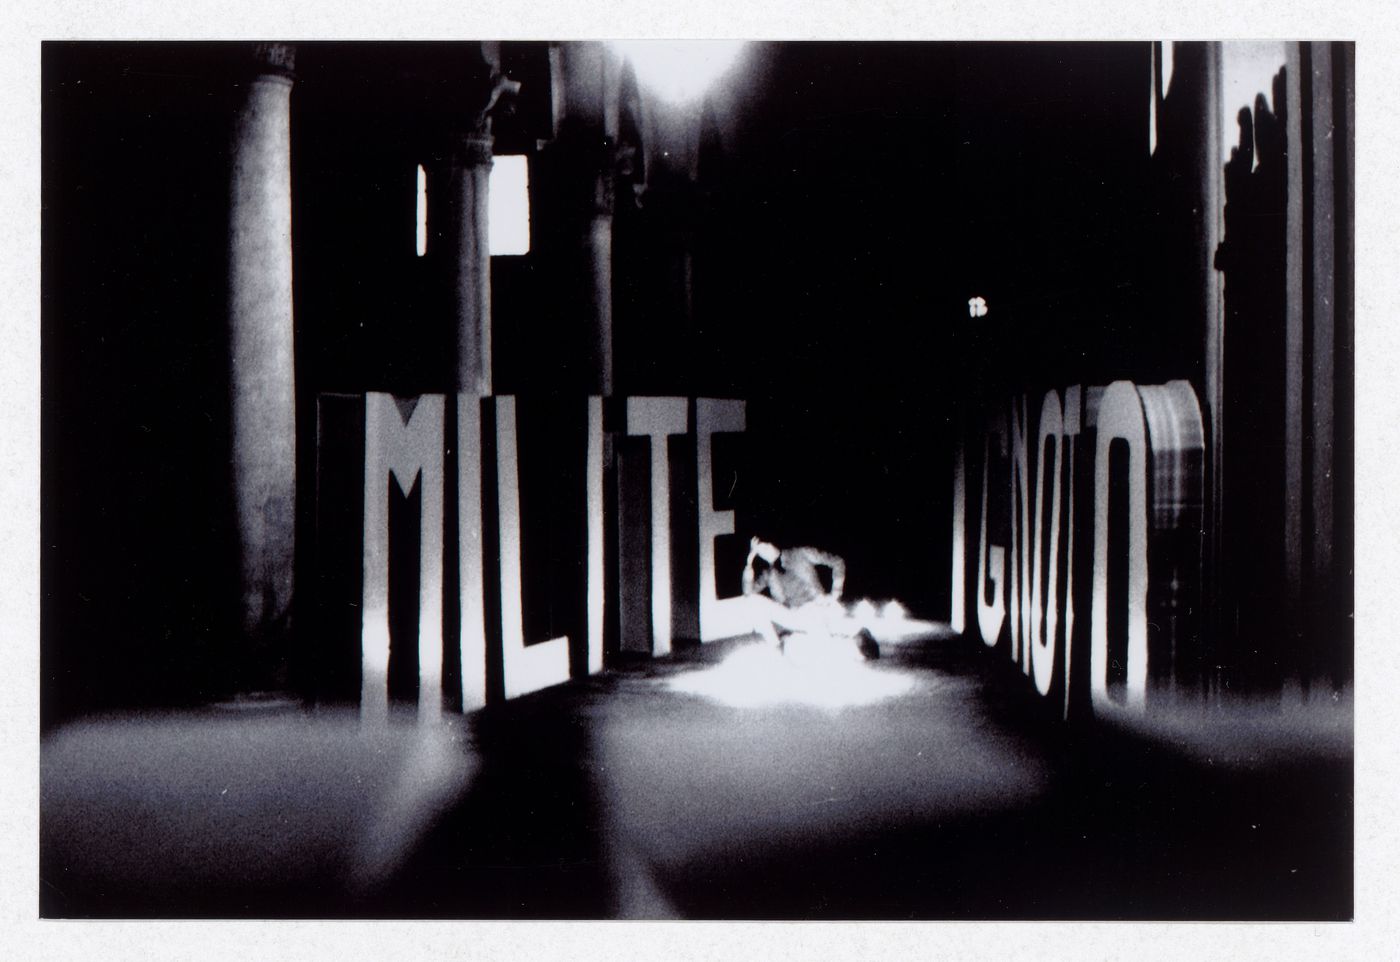 Photograph of the installation for Milite Ignoto